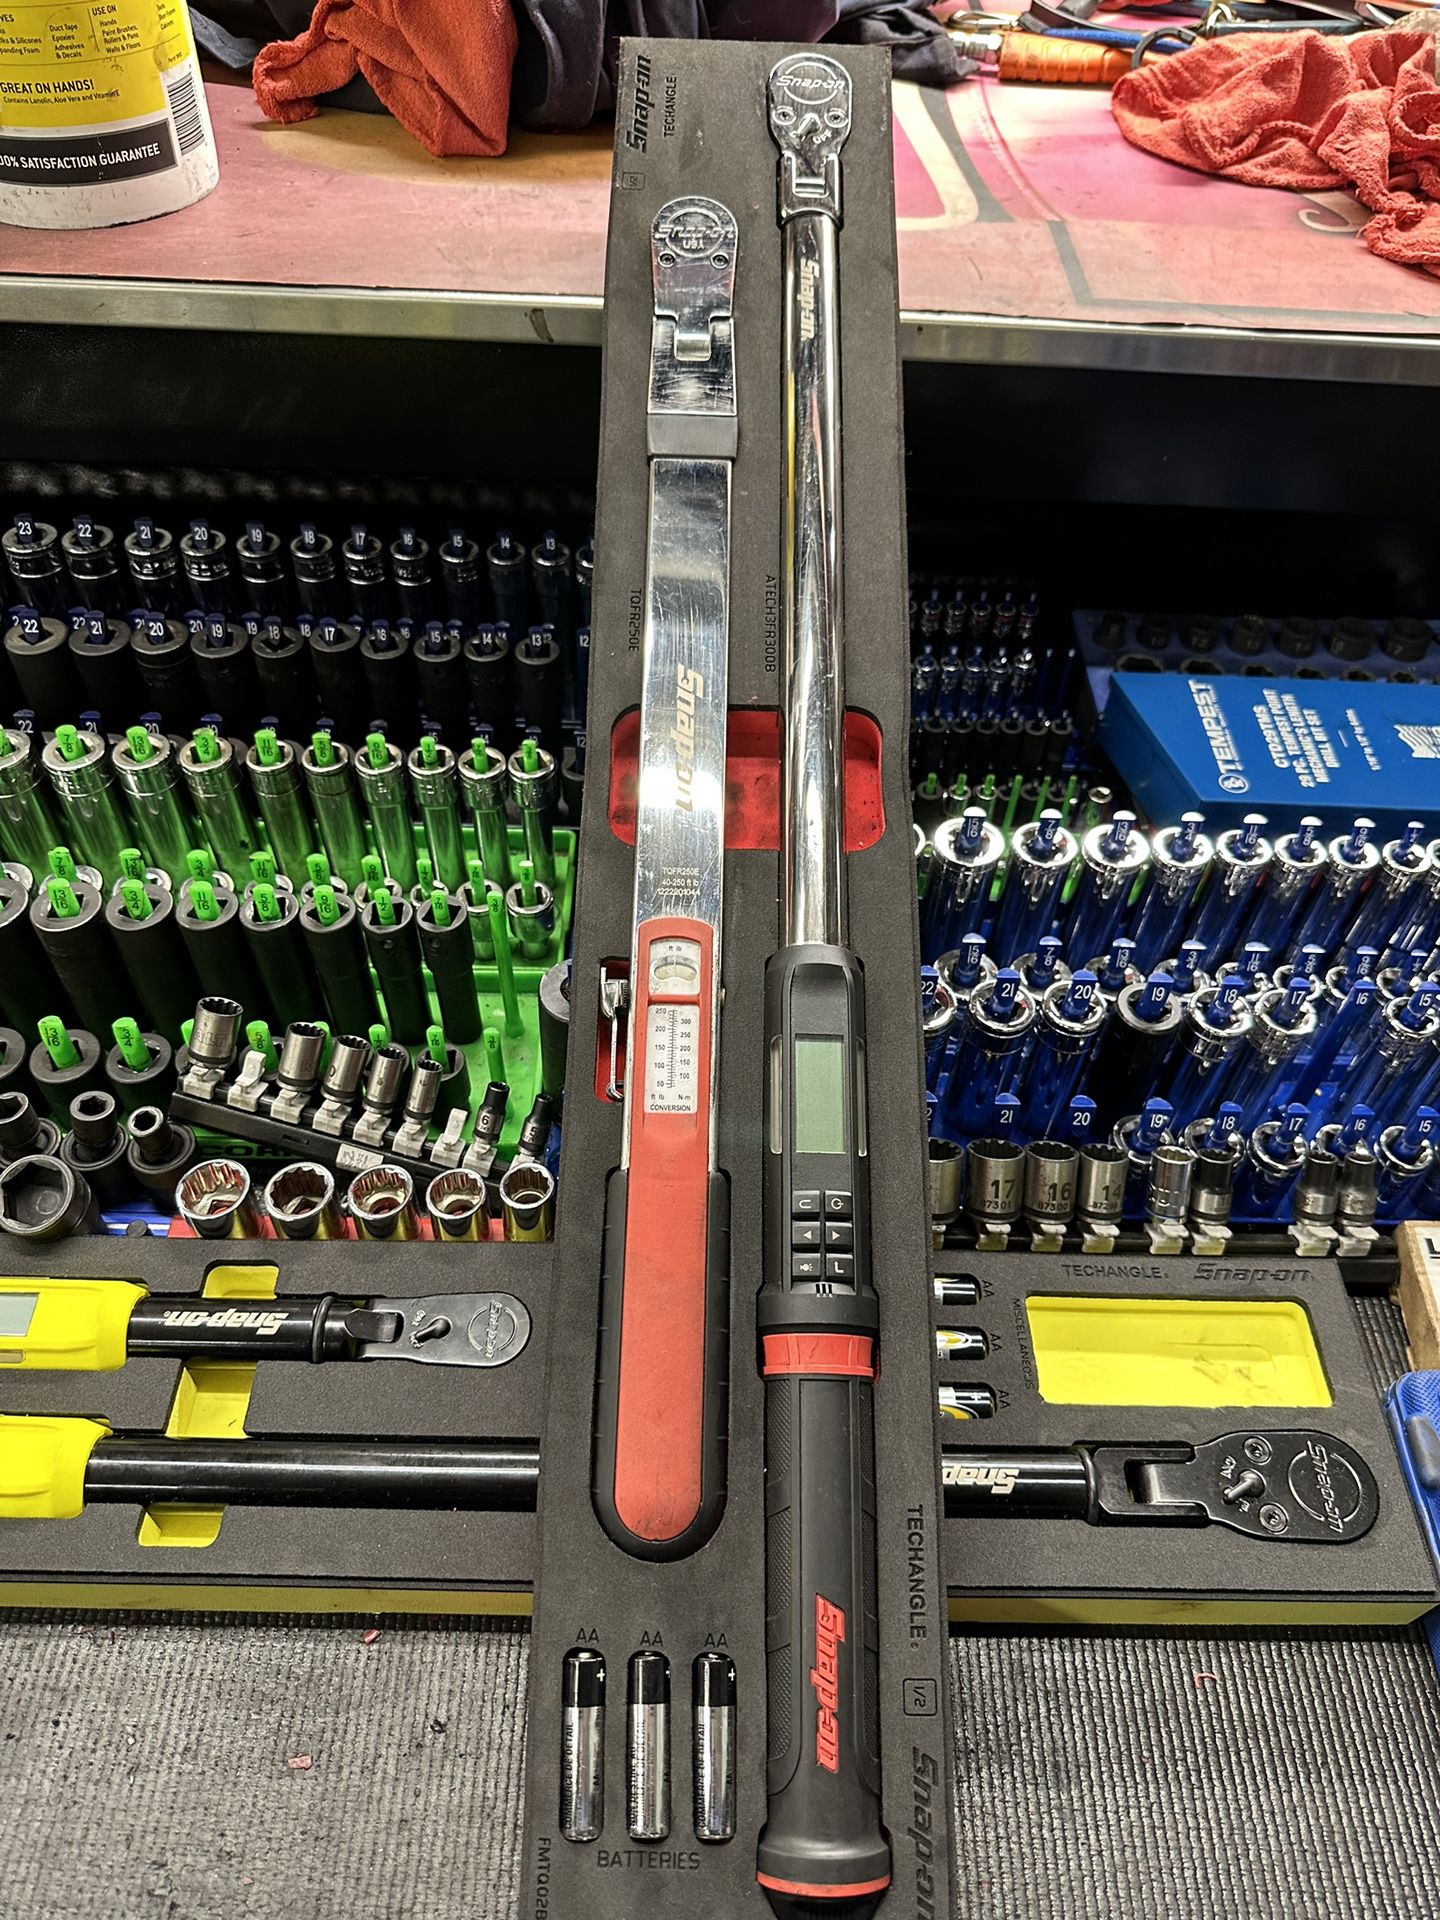 1/2 Snapon Torch Wrench Digital And Clicker Type